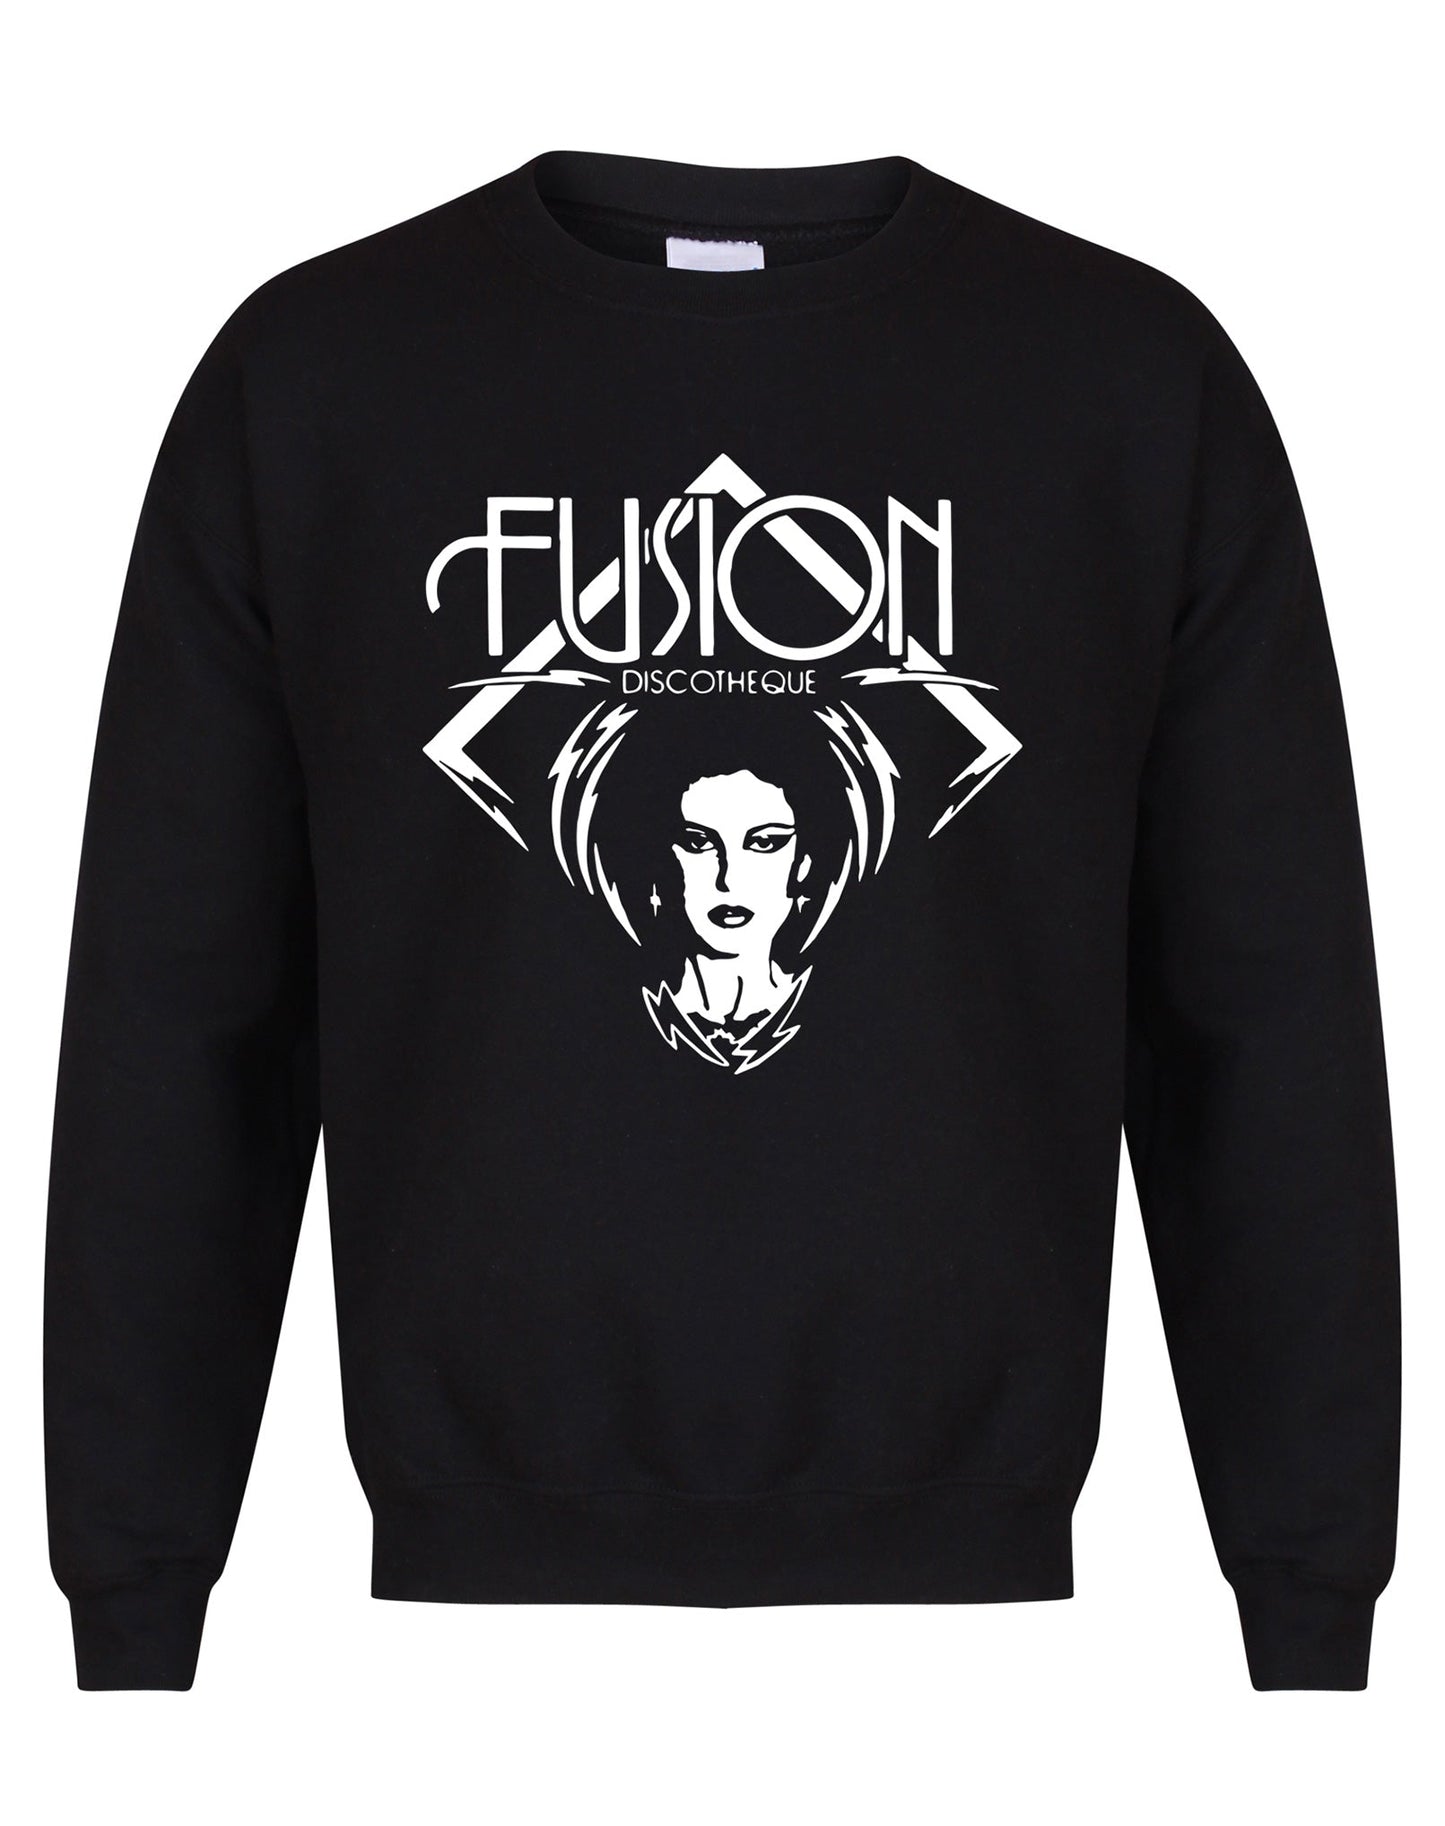 Fusion unisex fit sweatshirt - various colours - Dirty Stop Outs